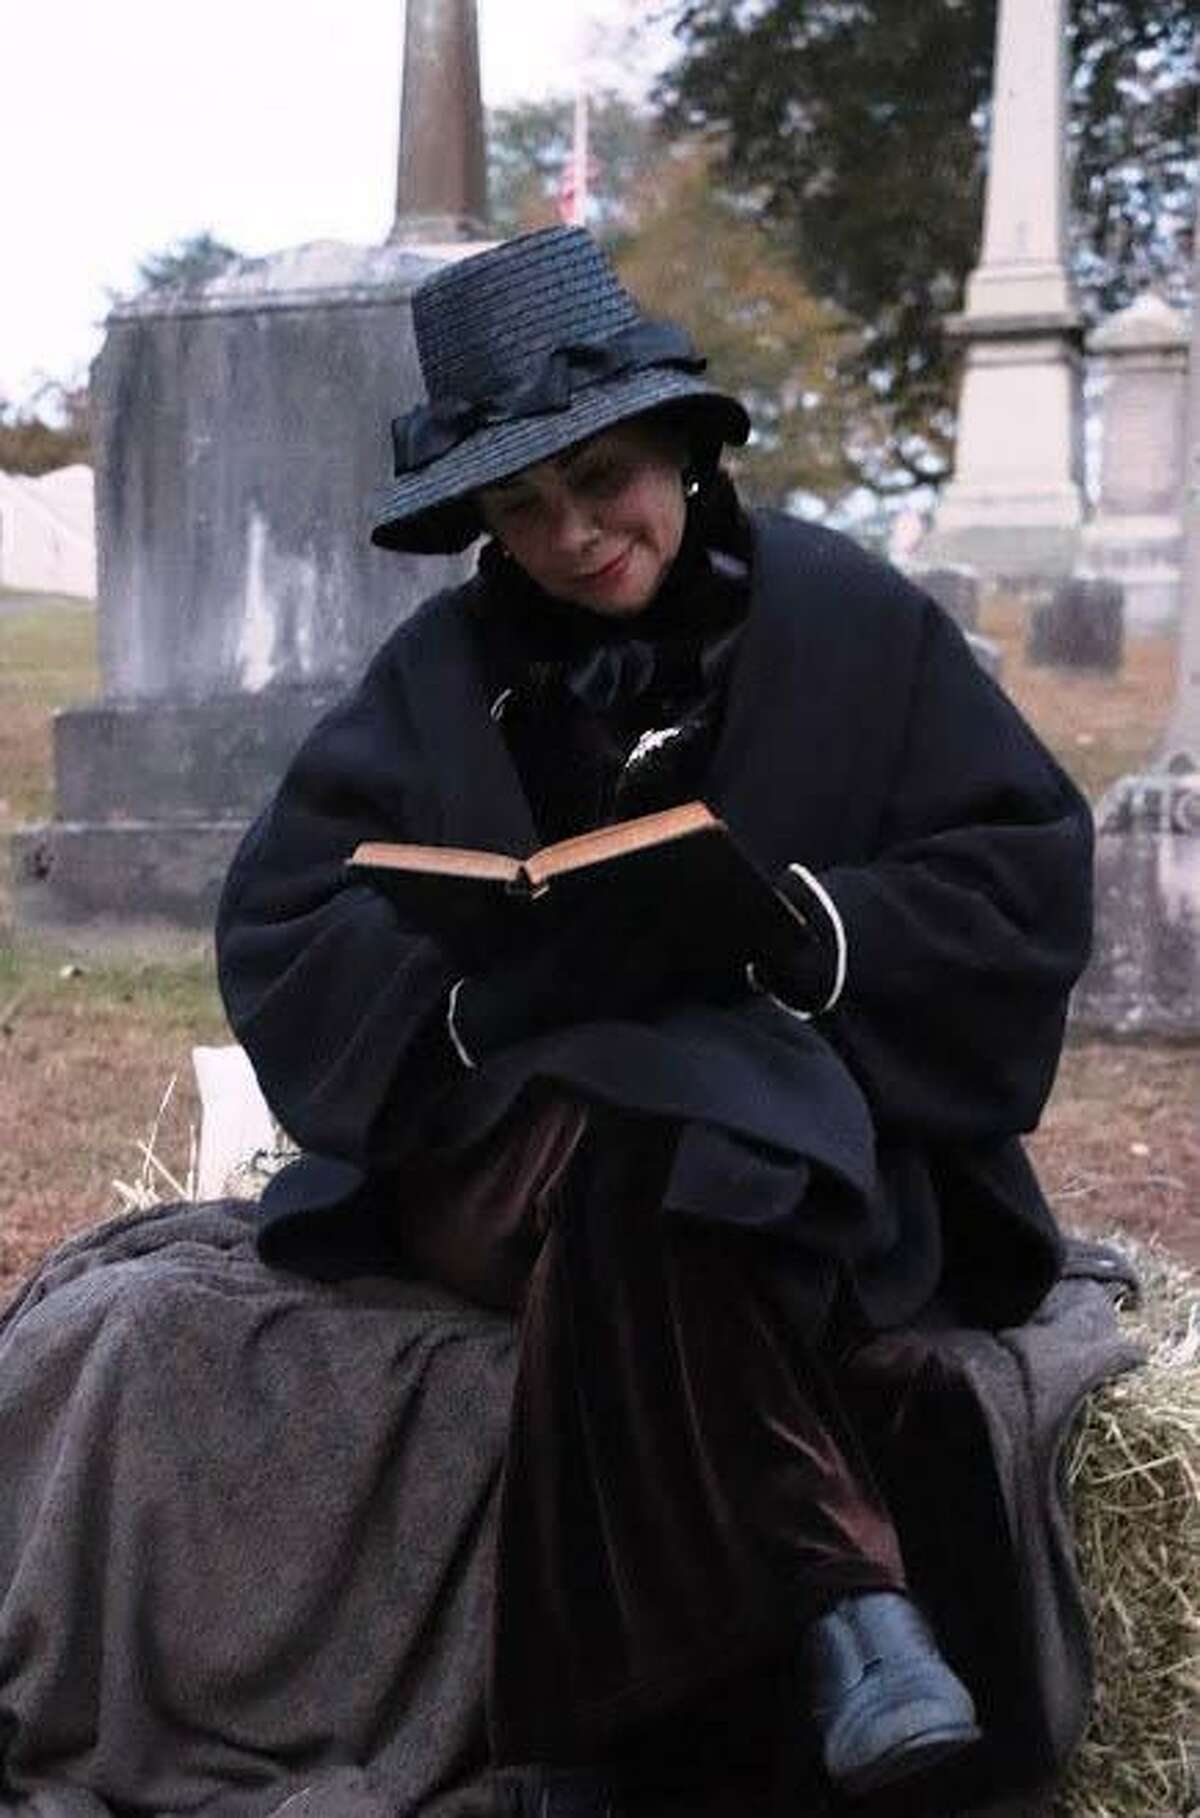 The 12th annual Washington Green Cemetery Tour will be held Oct. 25 from 6:30 to 8:30 p.m. A rain date of Oct. 27 is planned. Above, Bibiana Andreli portrays Abigail Gunn.